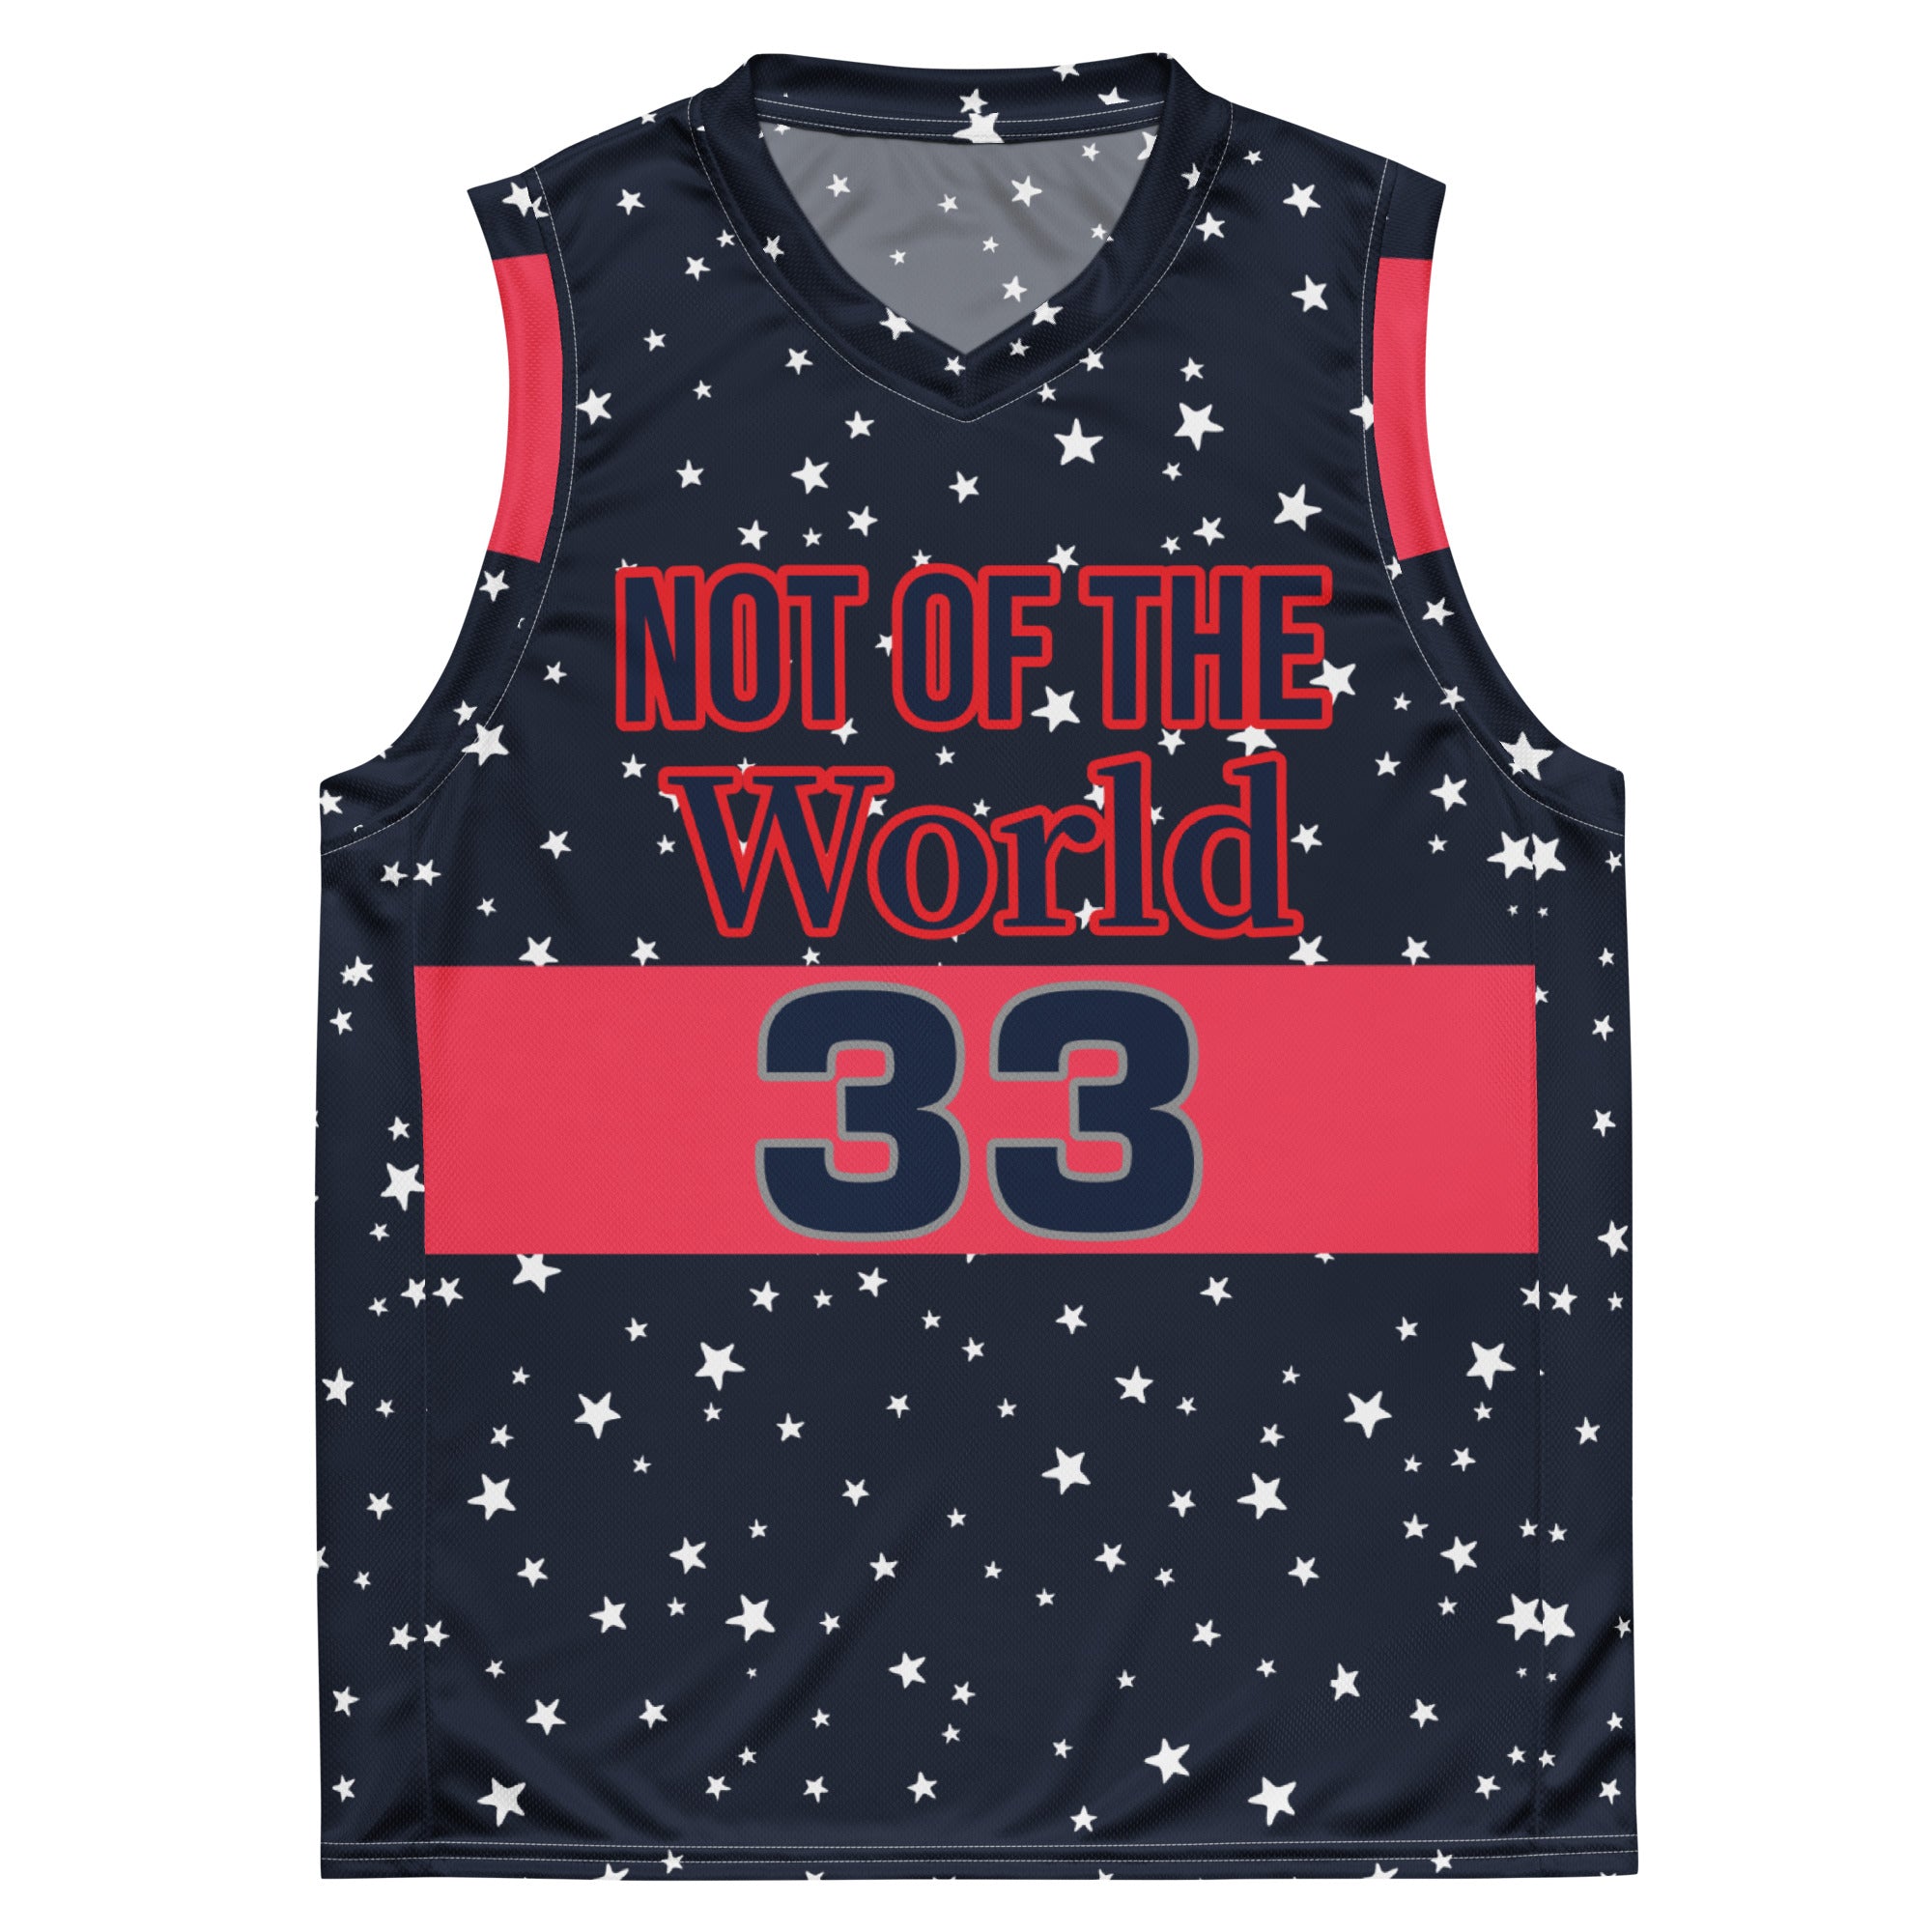 Not of the World basketball jersey